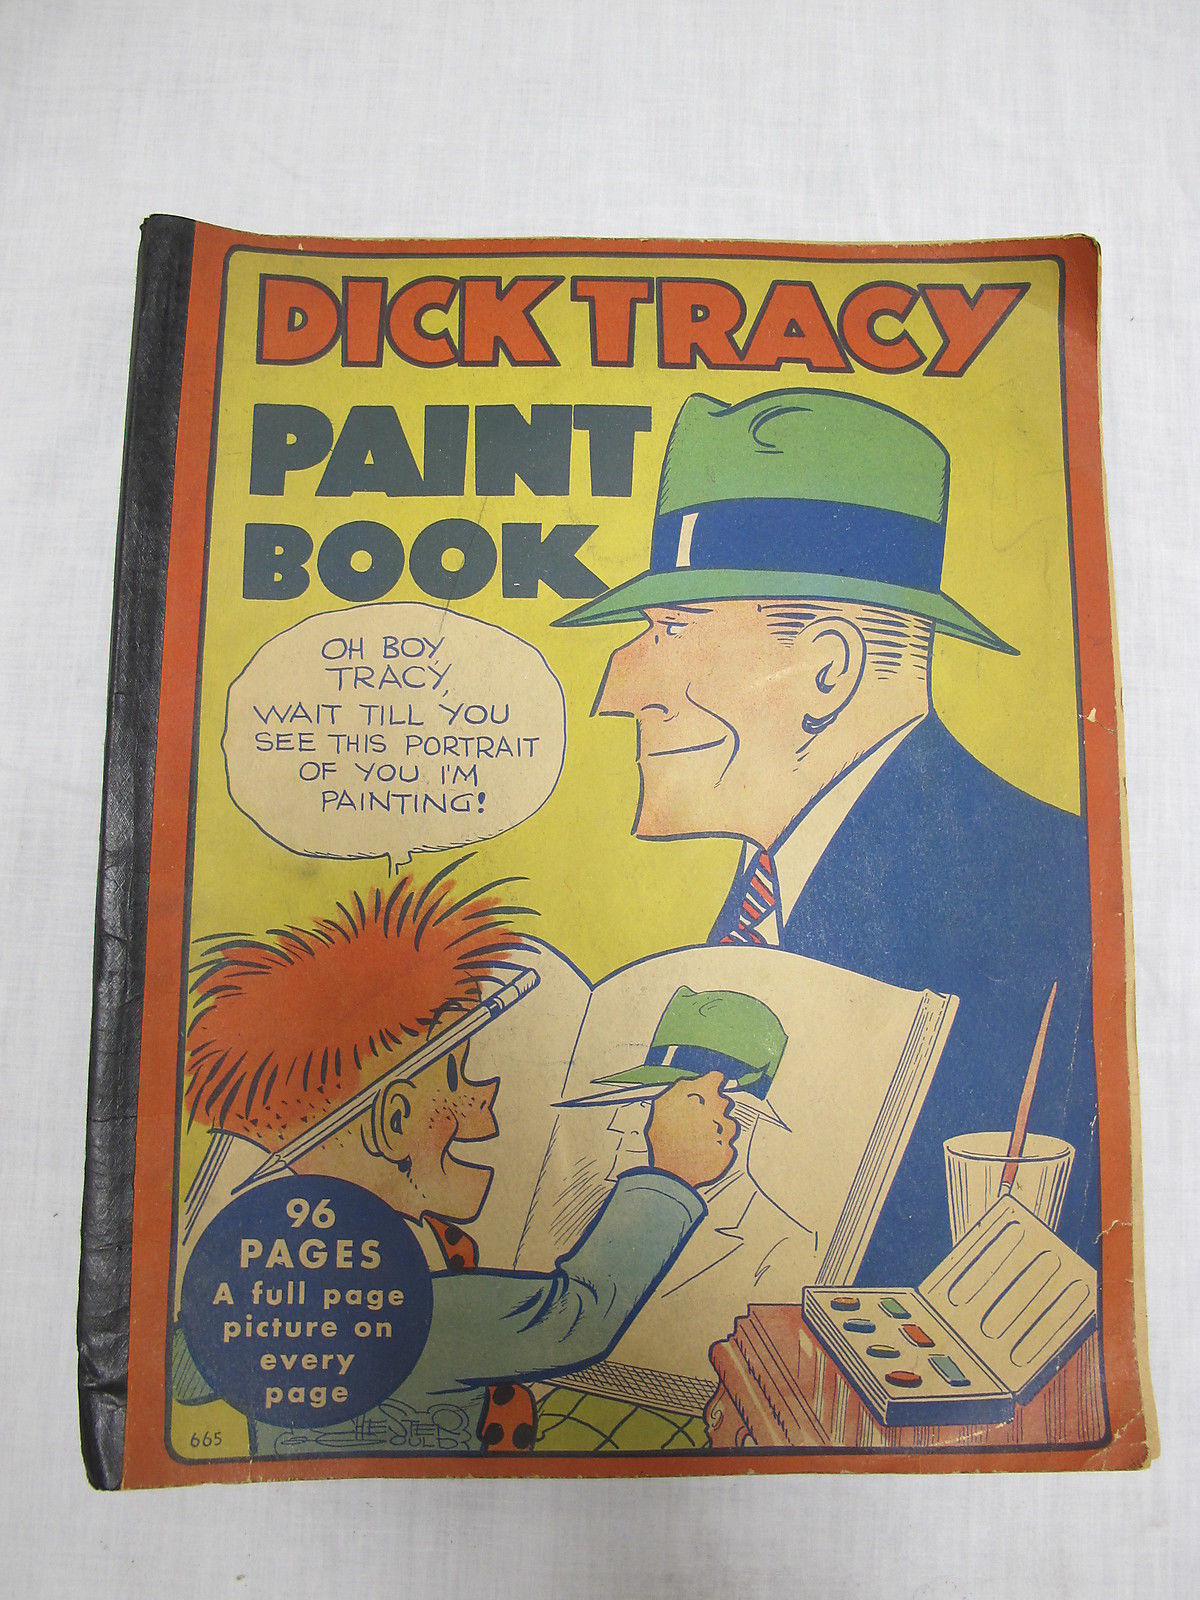 Scarce Dick Tracy Paint Book #665 1935 Chester Gould Water Color Coloring Book